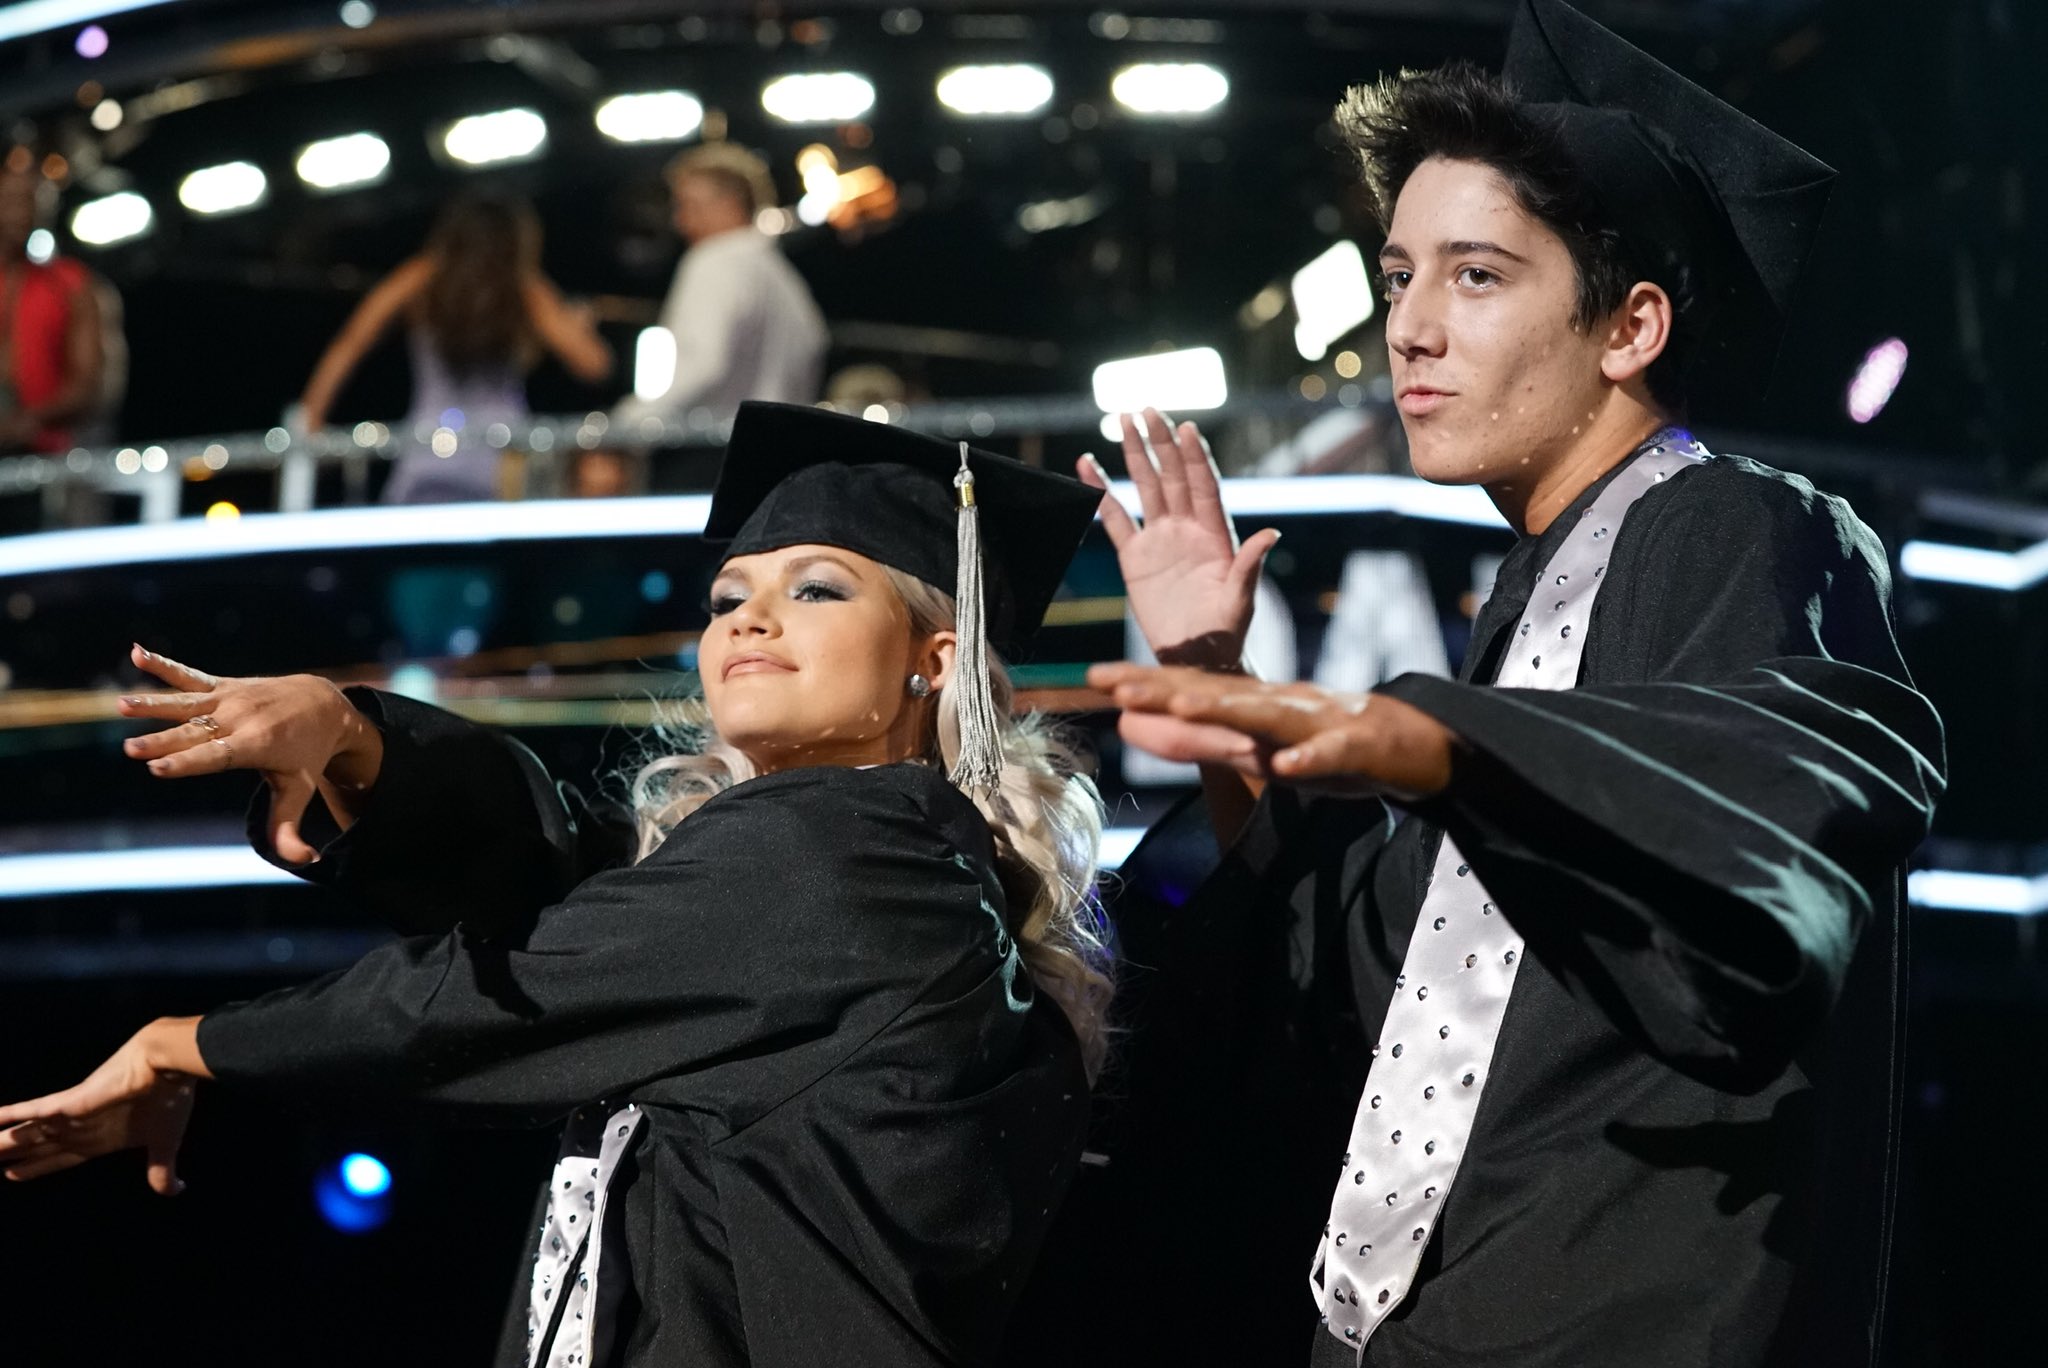 PHOTO: Milo Manheim, a Disney Channel star, with his partner Witney Carson, tied for the second-highest score on the Monday, Oct. 8, 2018, episode of "Dancing with the Stars."